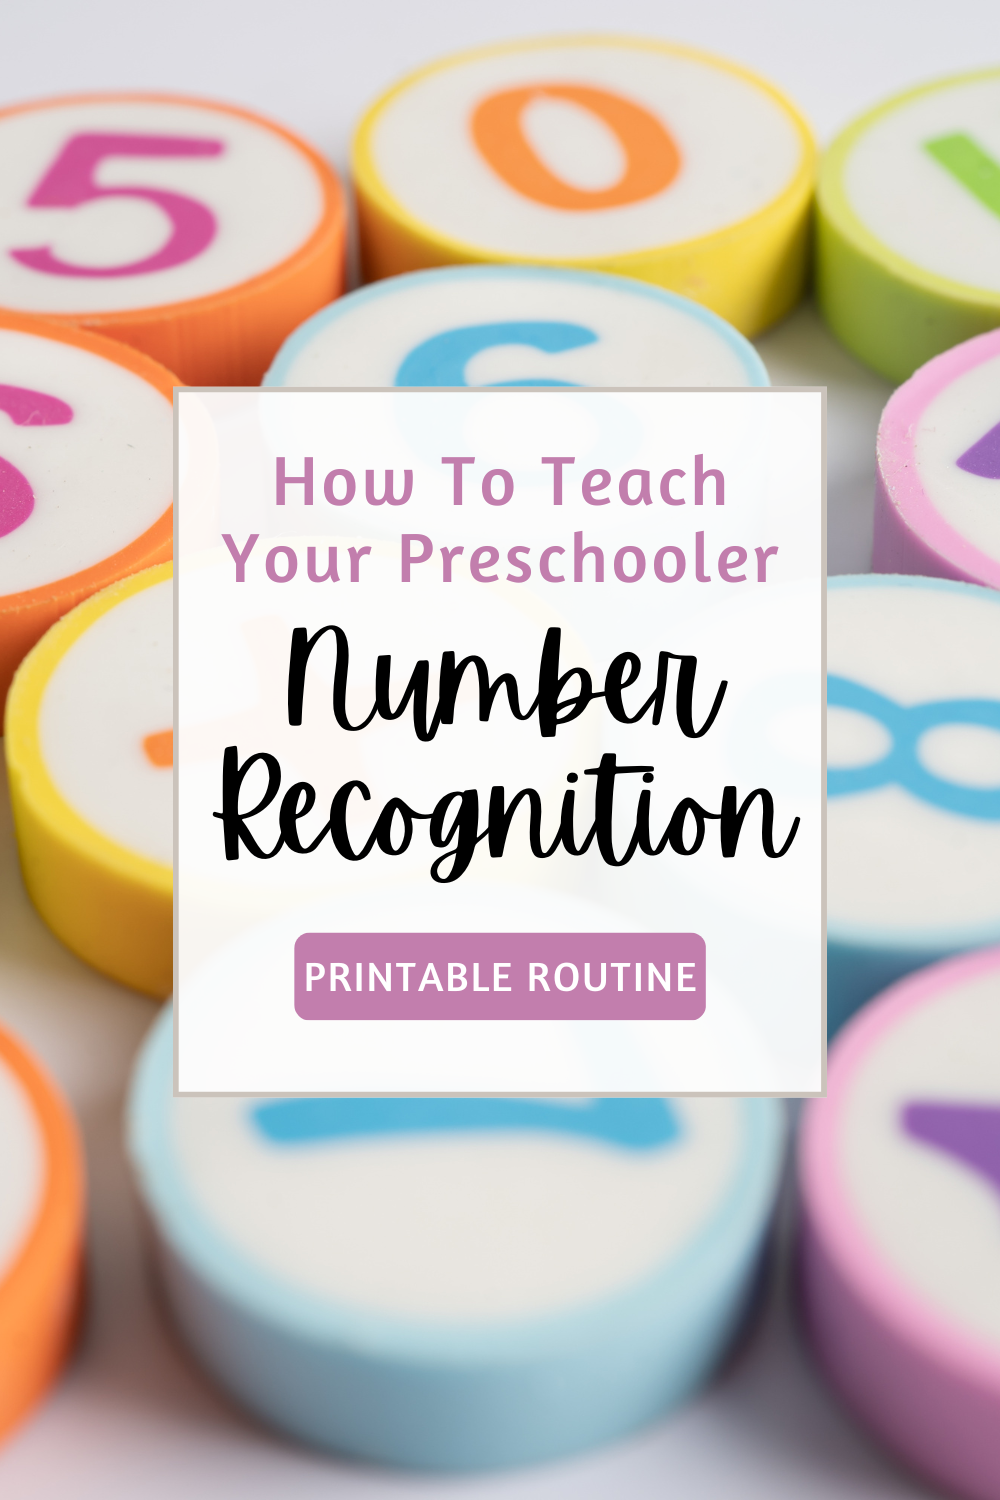 How To Teach Number Recognition to Your Preschooler with This Brilliantly Simple, 5-Step Routine